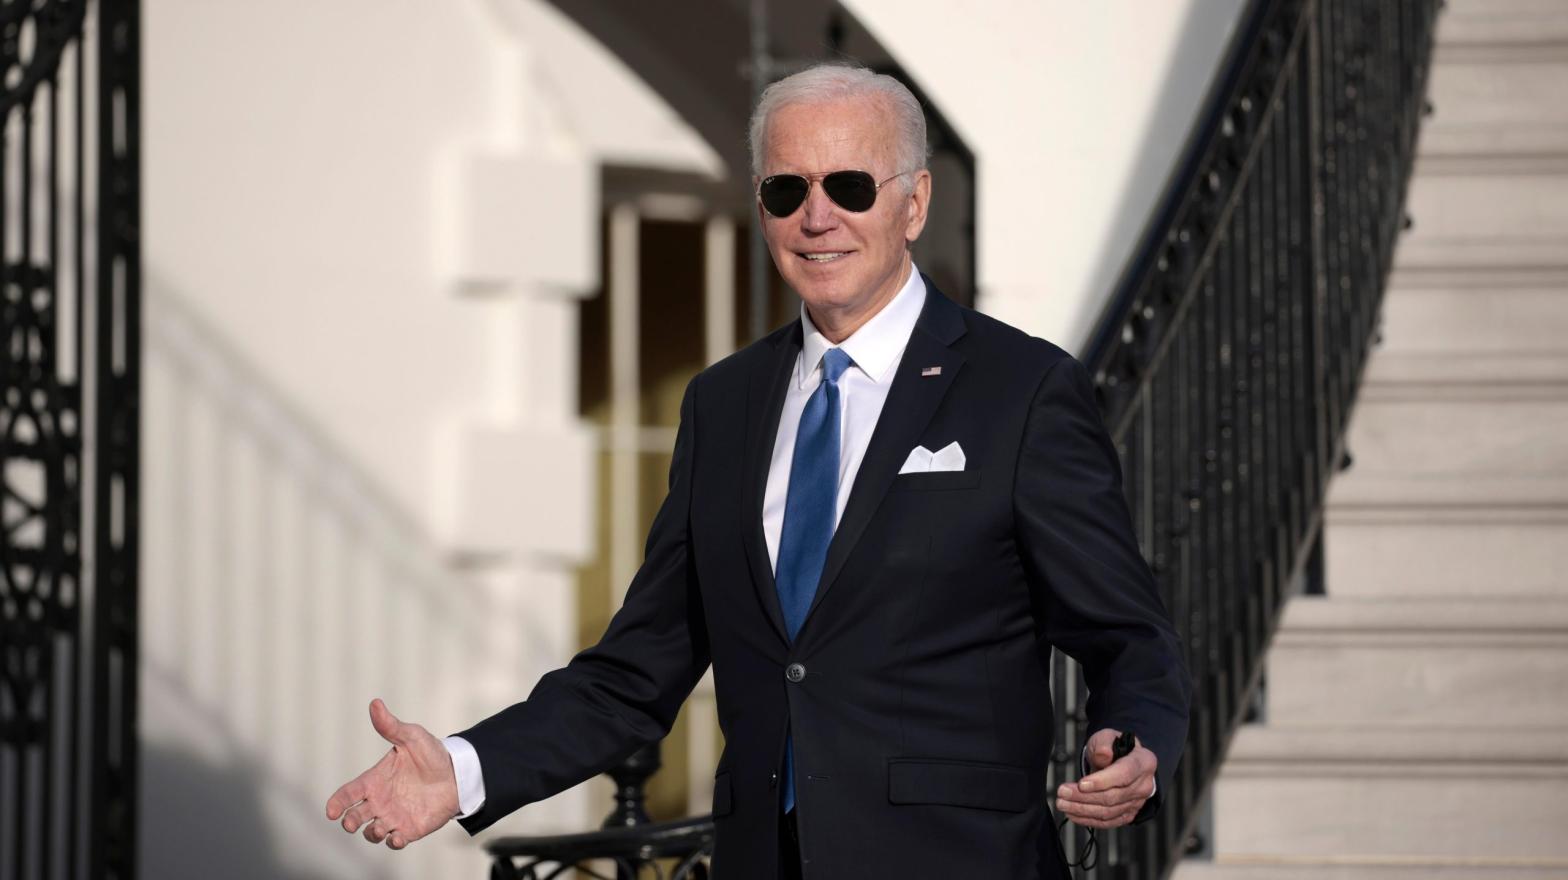 President Joe Biden gestures to journalists after returning to the White House. (Photo: Anna Moneymaker, Getty Images)